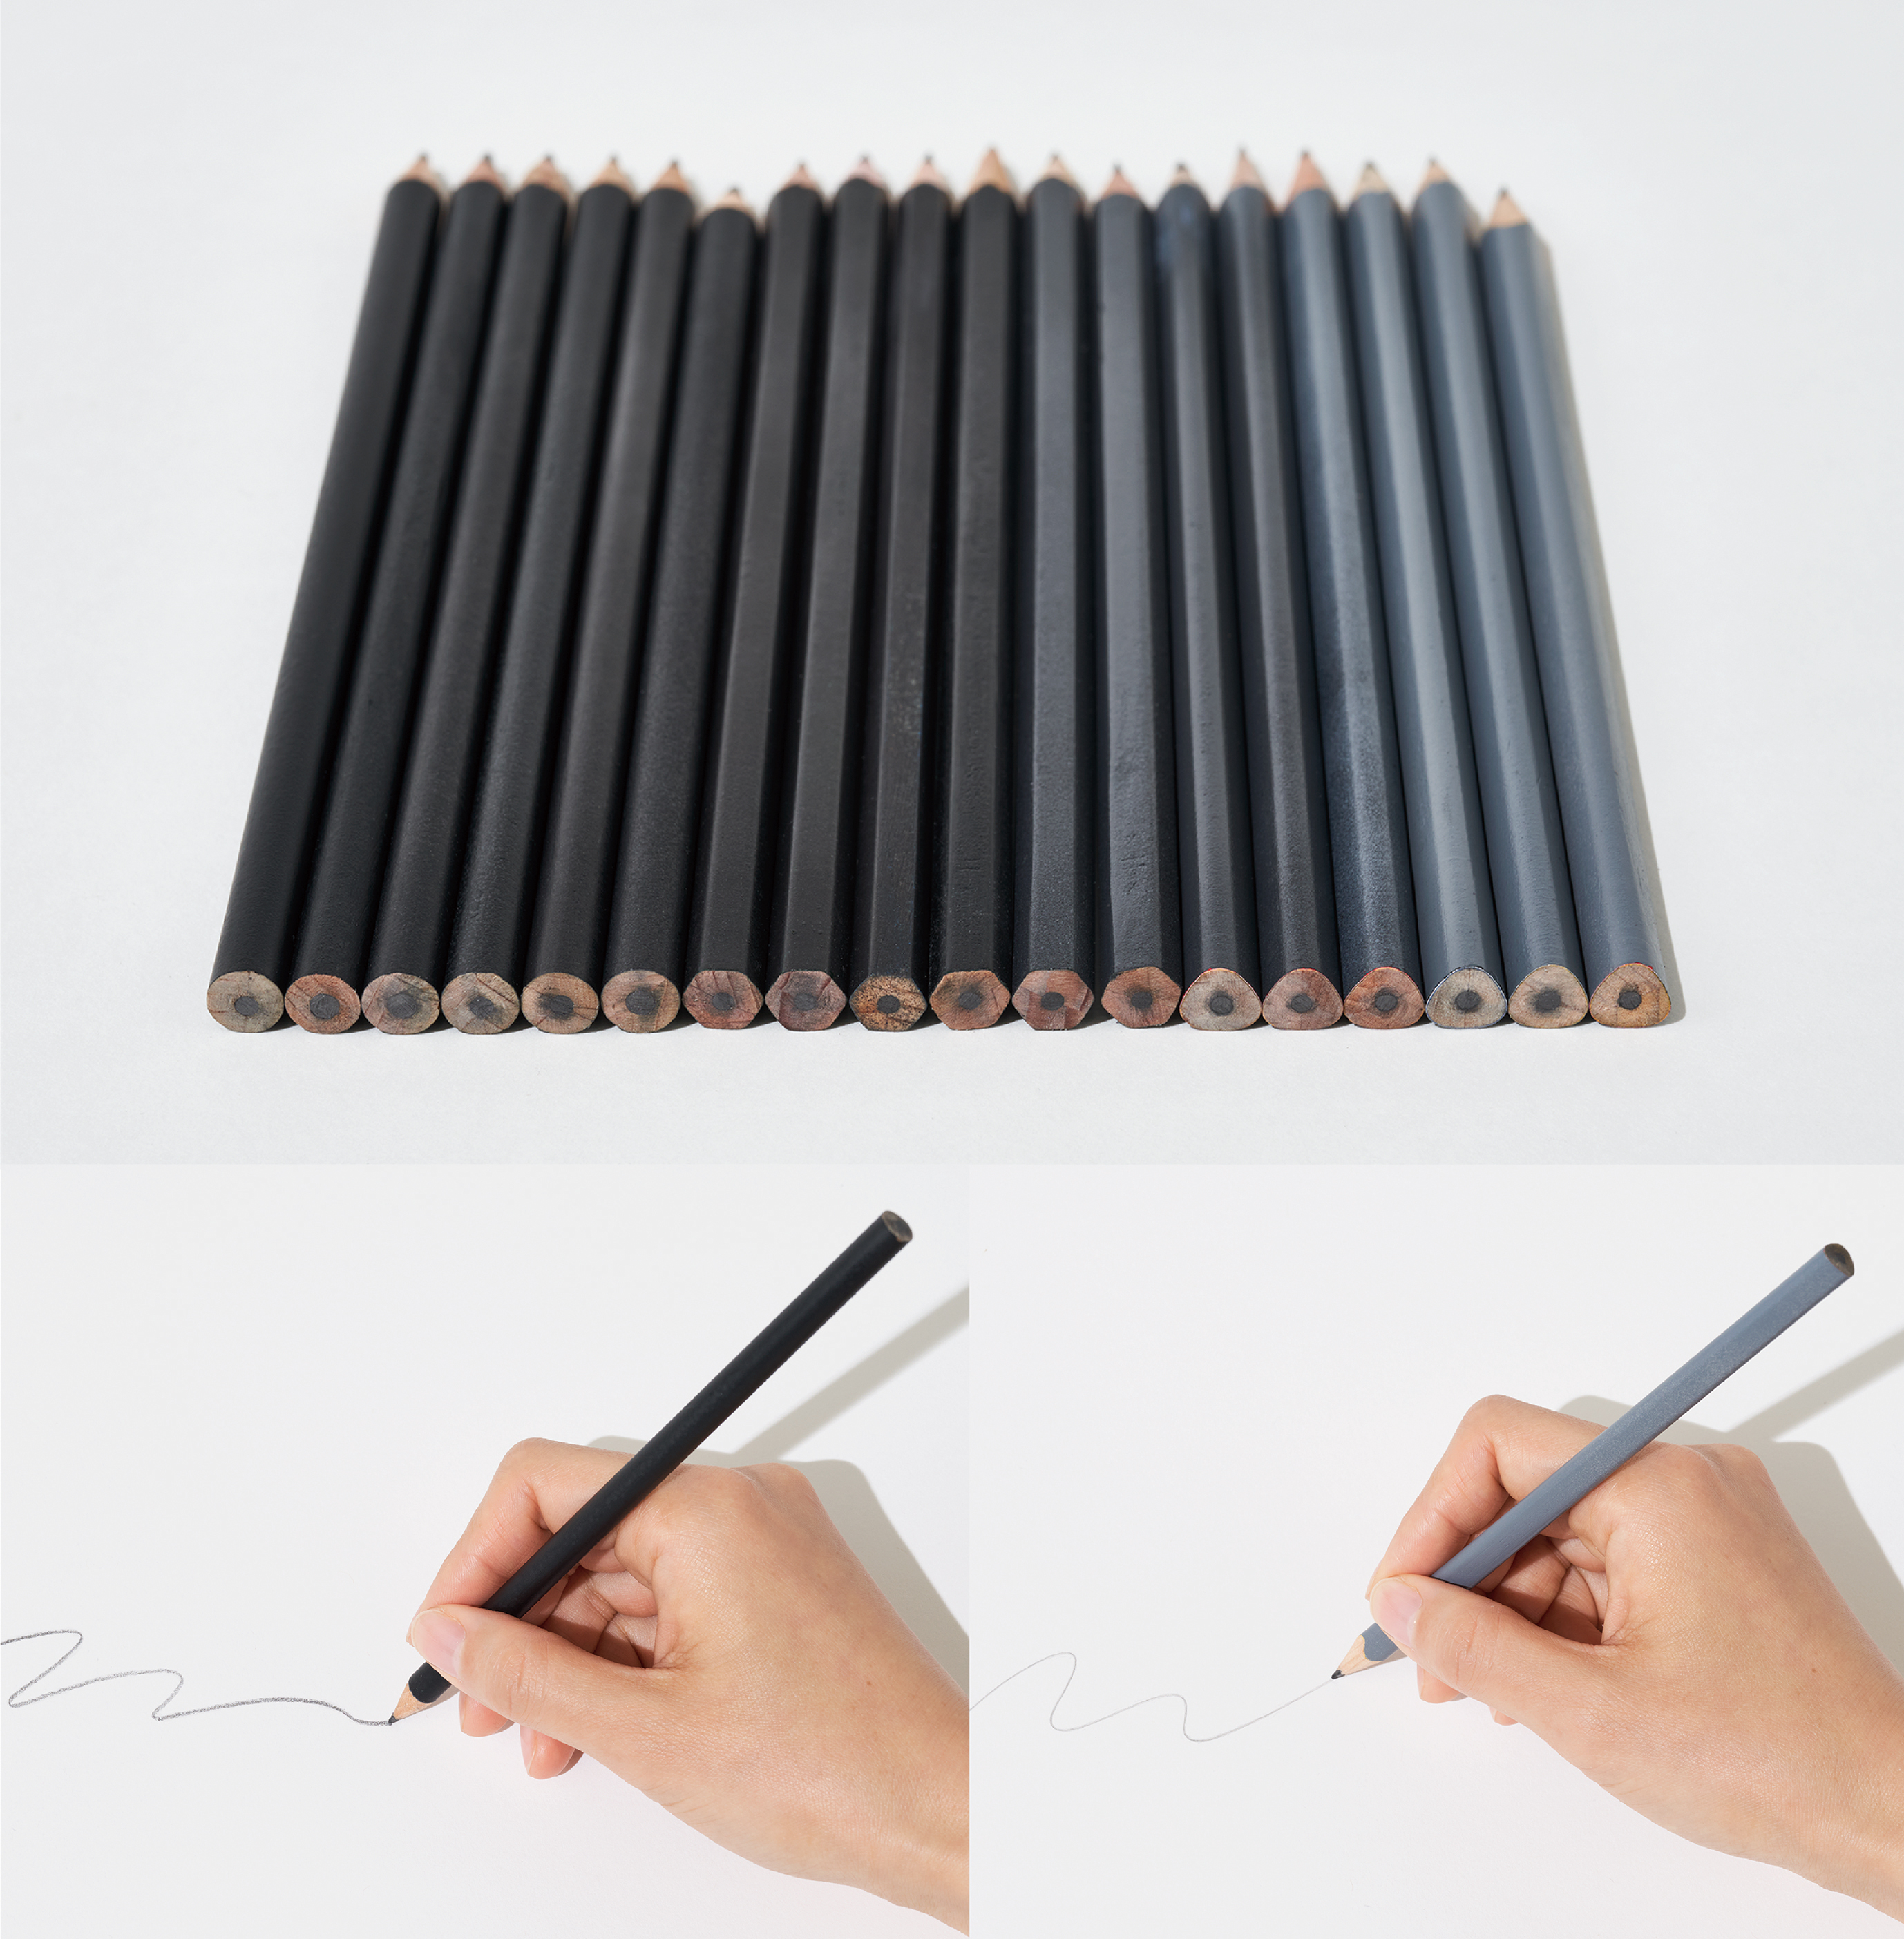 Leaden, the sensory pencil collection by Soh YunPing